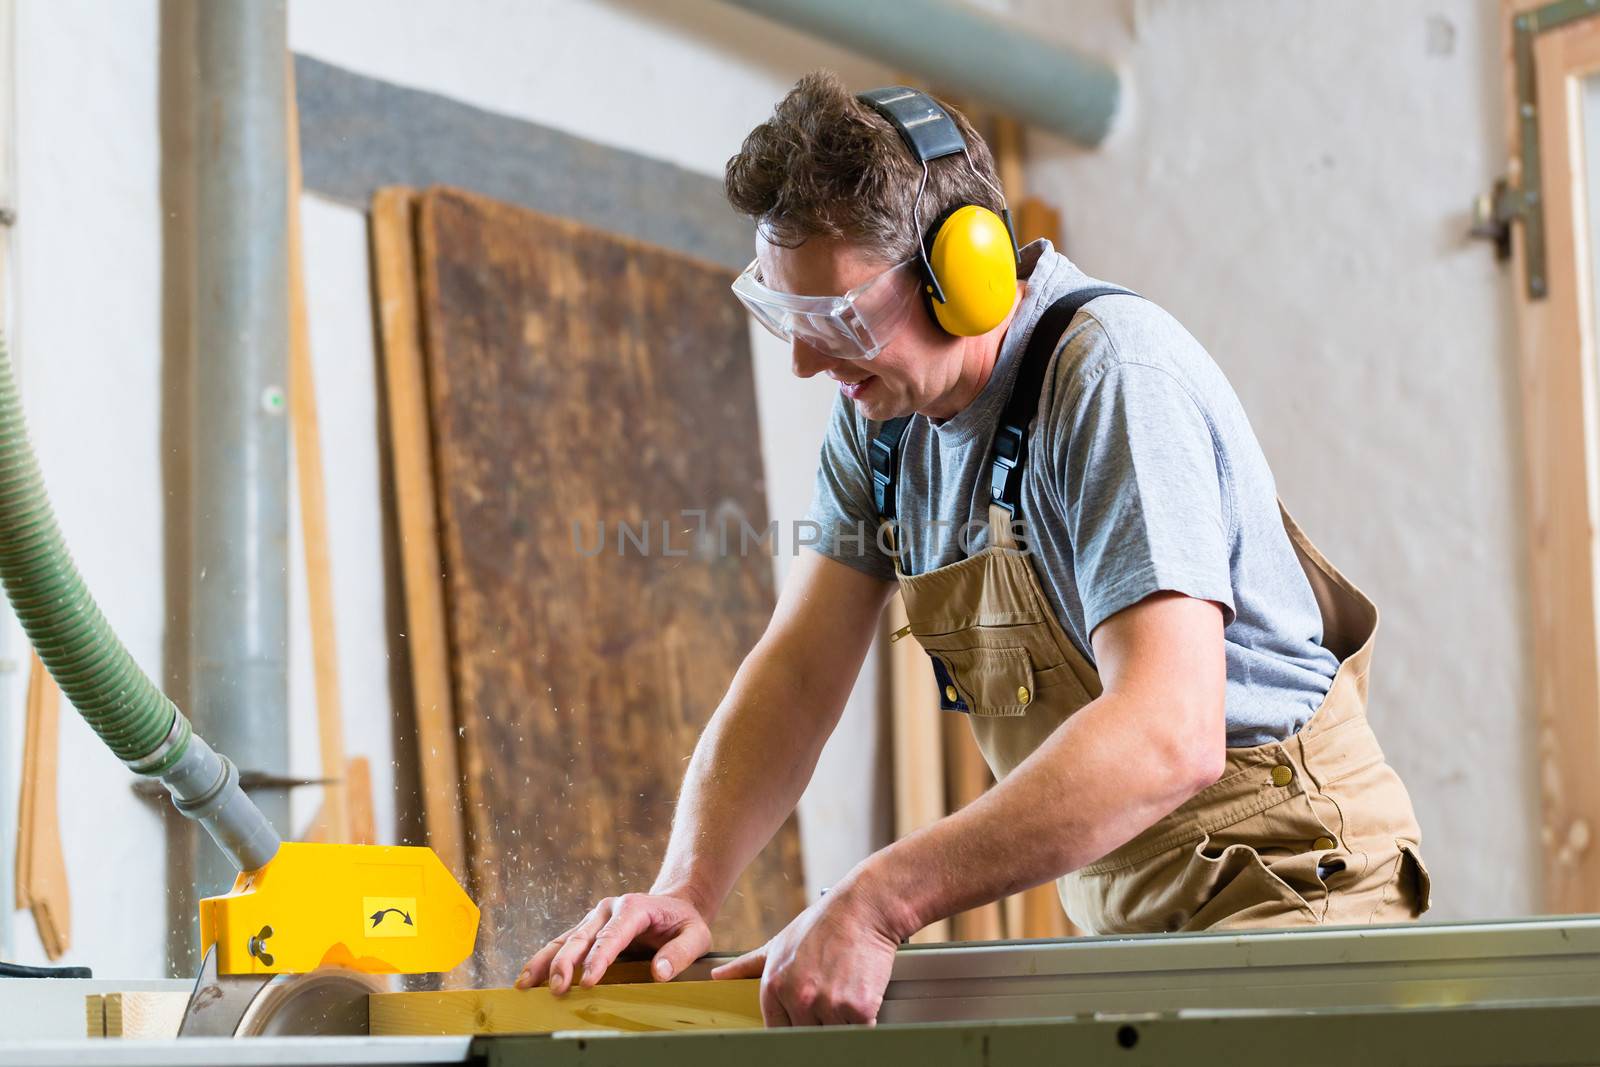 Carpenter working on an electric buzz saw cutting some boards, he is wearing safety glasses and hearing protection for safe workplace